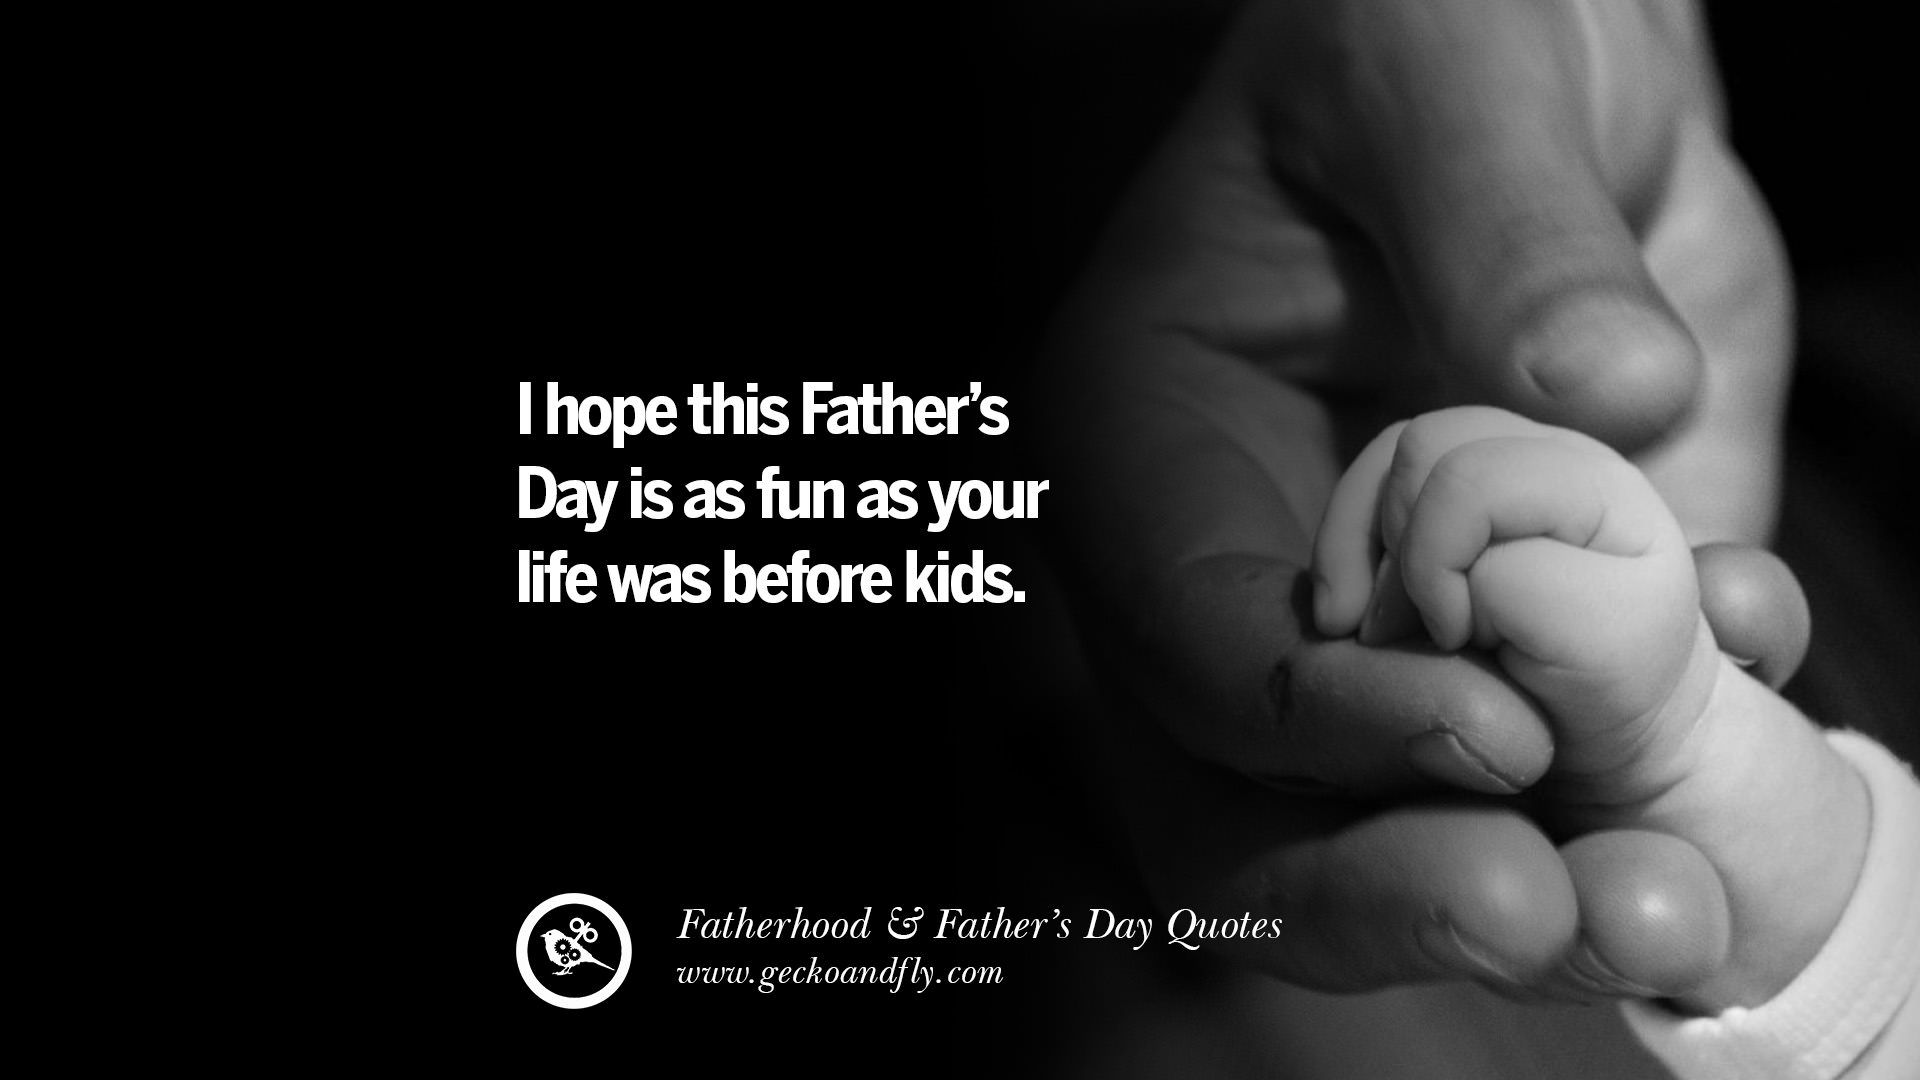 Inspiring And Funny Father's Day Quotes On Fatherhood